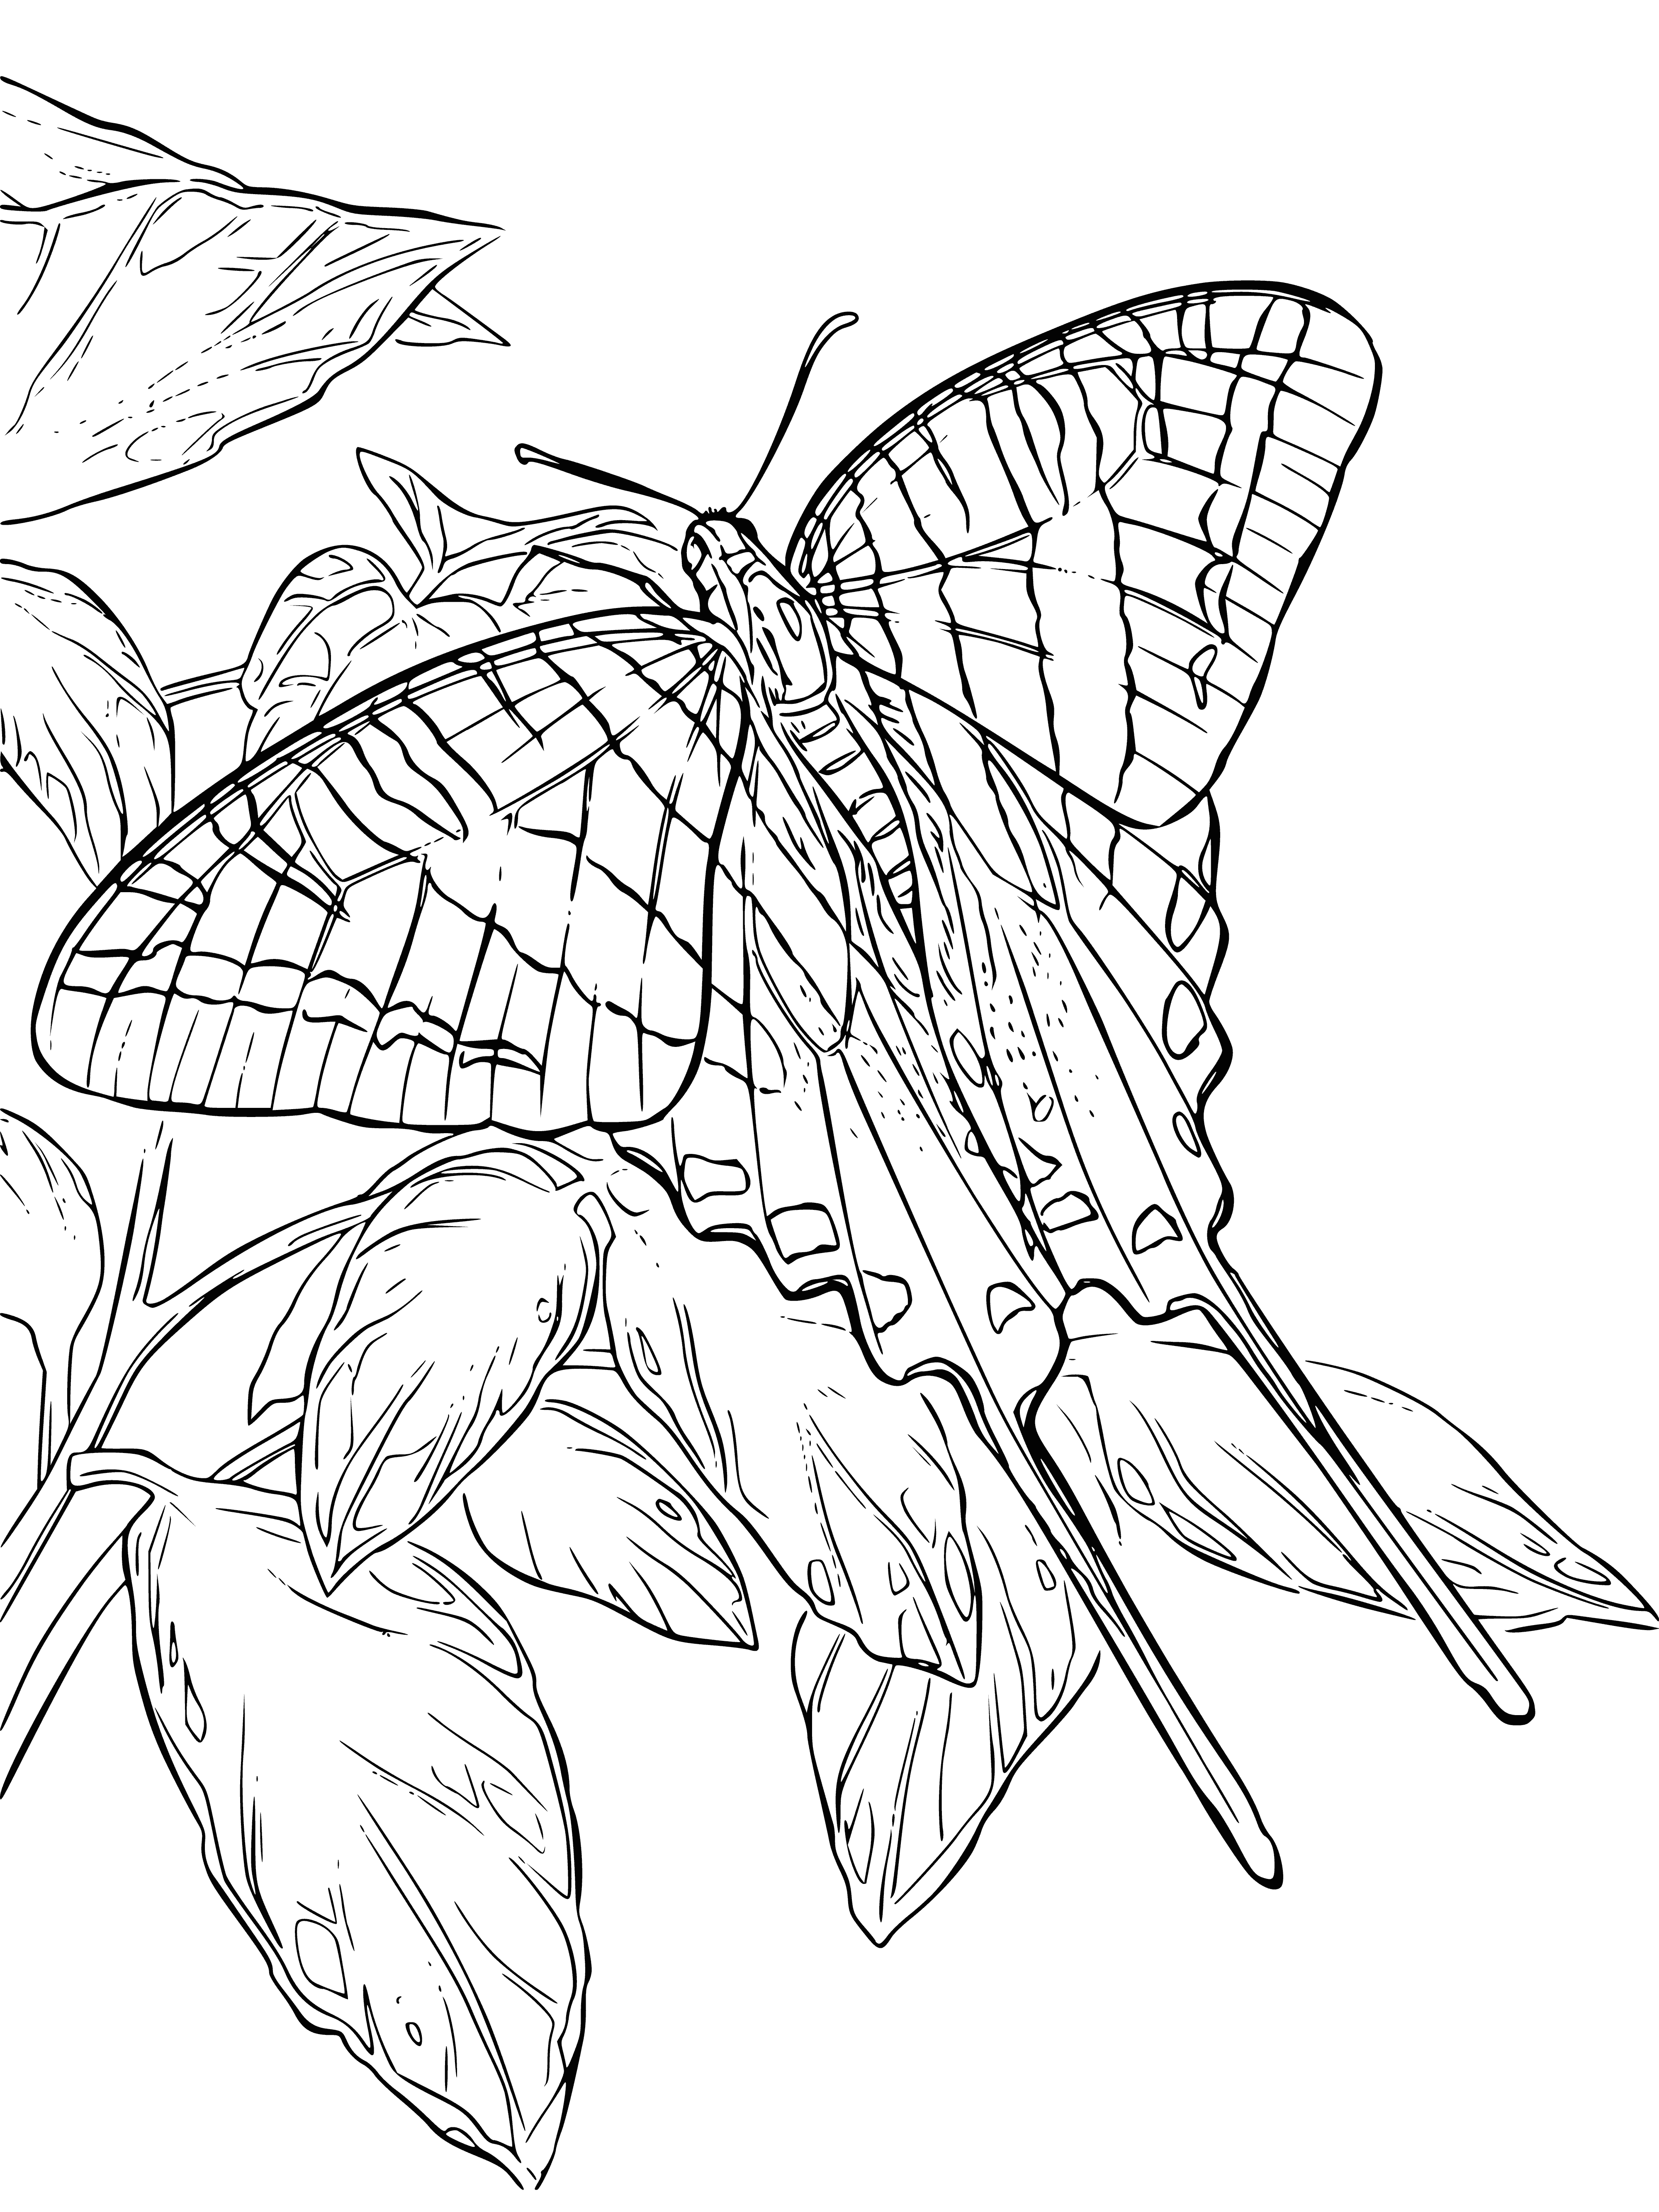 coloring page: Two butterflies flying, one orange w/spots, other yellow w/stripes to color.